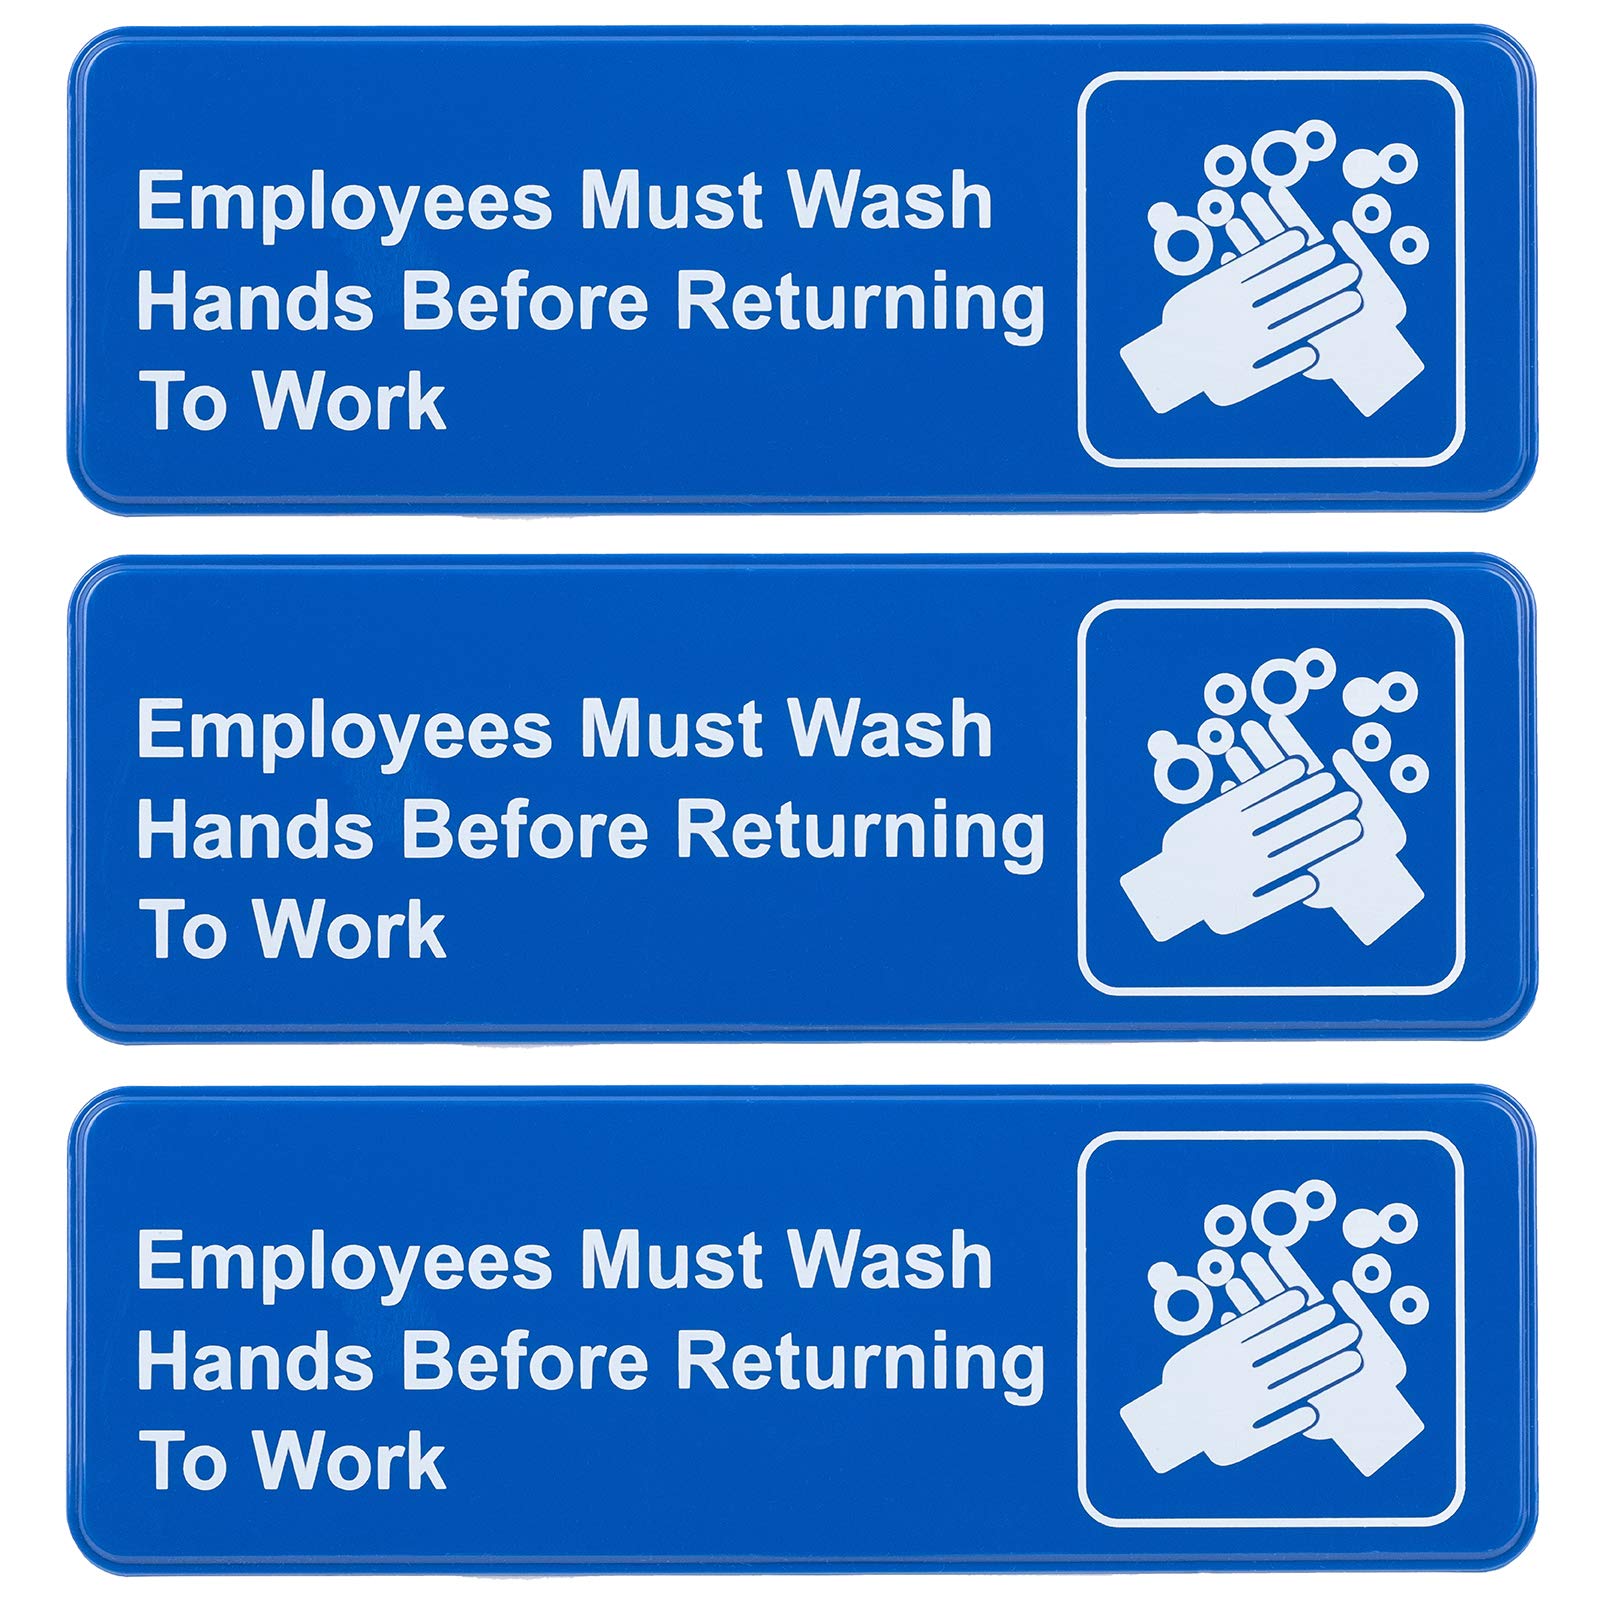 Excello Global Products Employees Must Wash Hands Before Returning to Work Sign: Easy to Mount Plastic Safety Informative Sign with Symbols Great for Business, 9"x3", Pack of 3 (Blue)